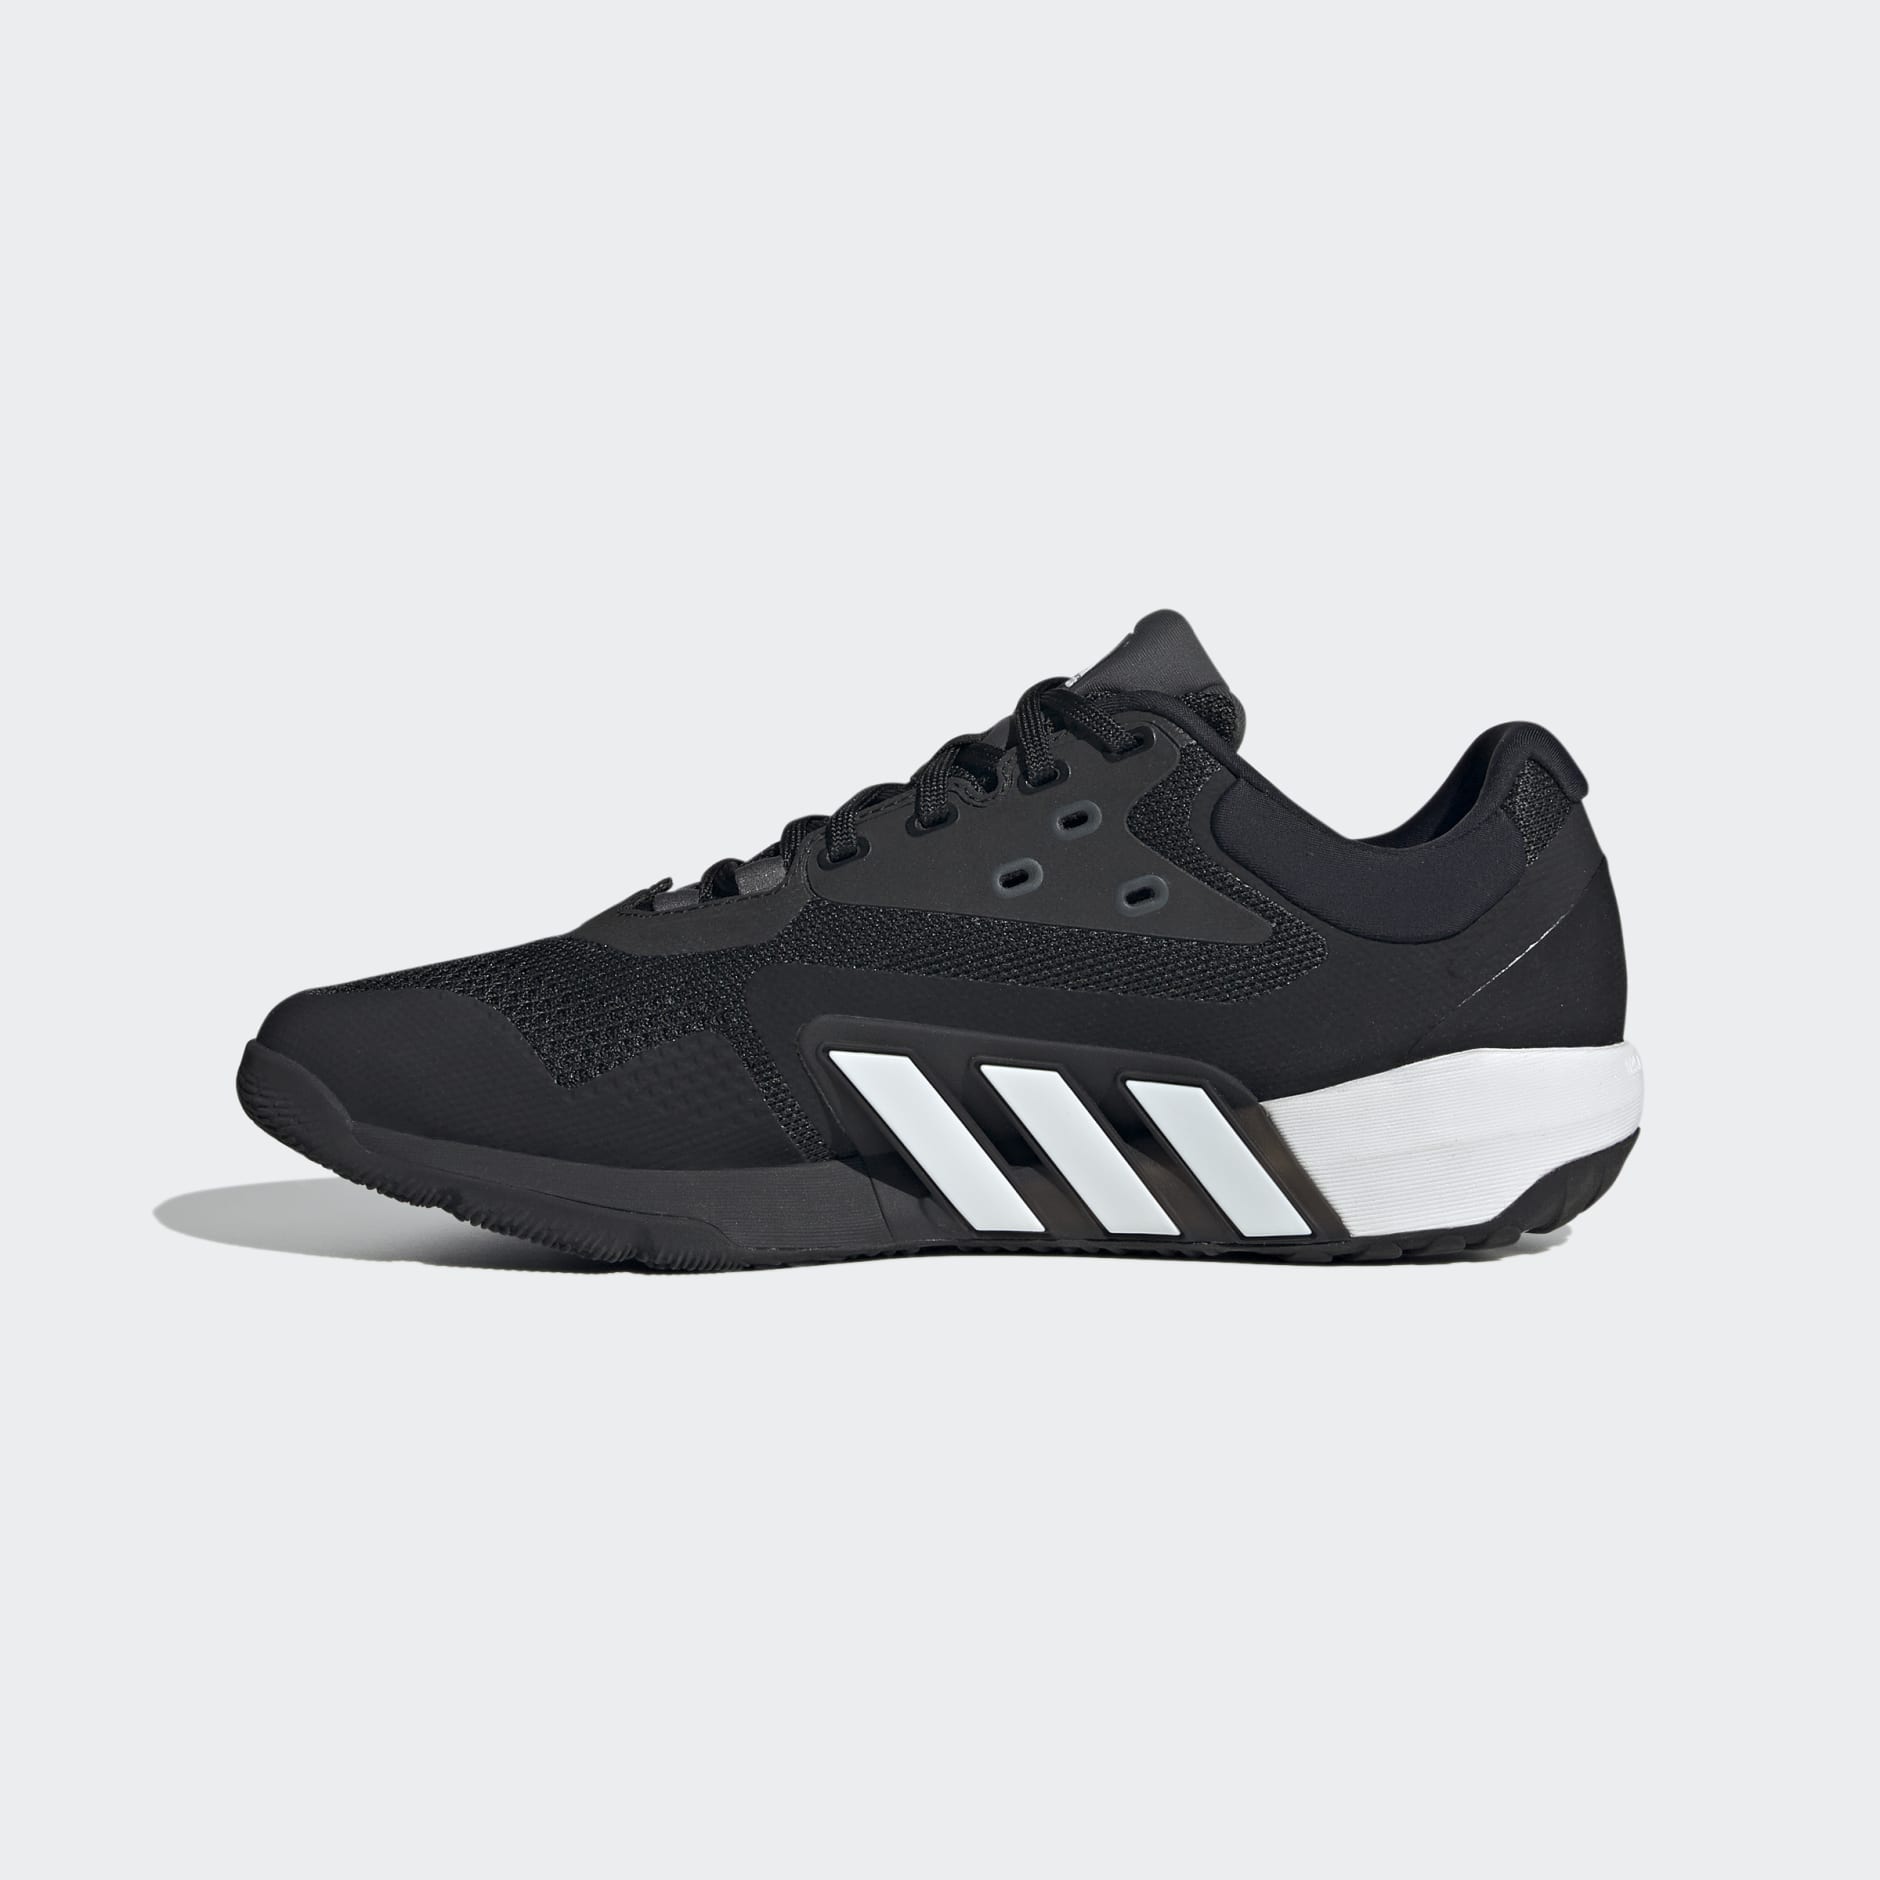 Shoes - Dropset Trainer Shoes - Black | adidas South Africa